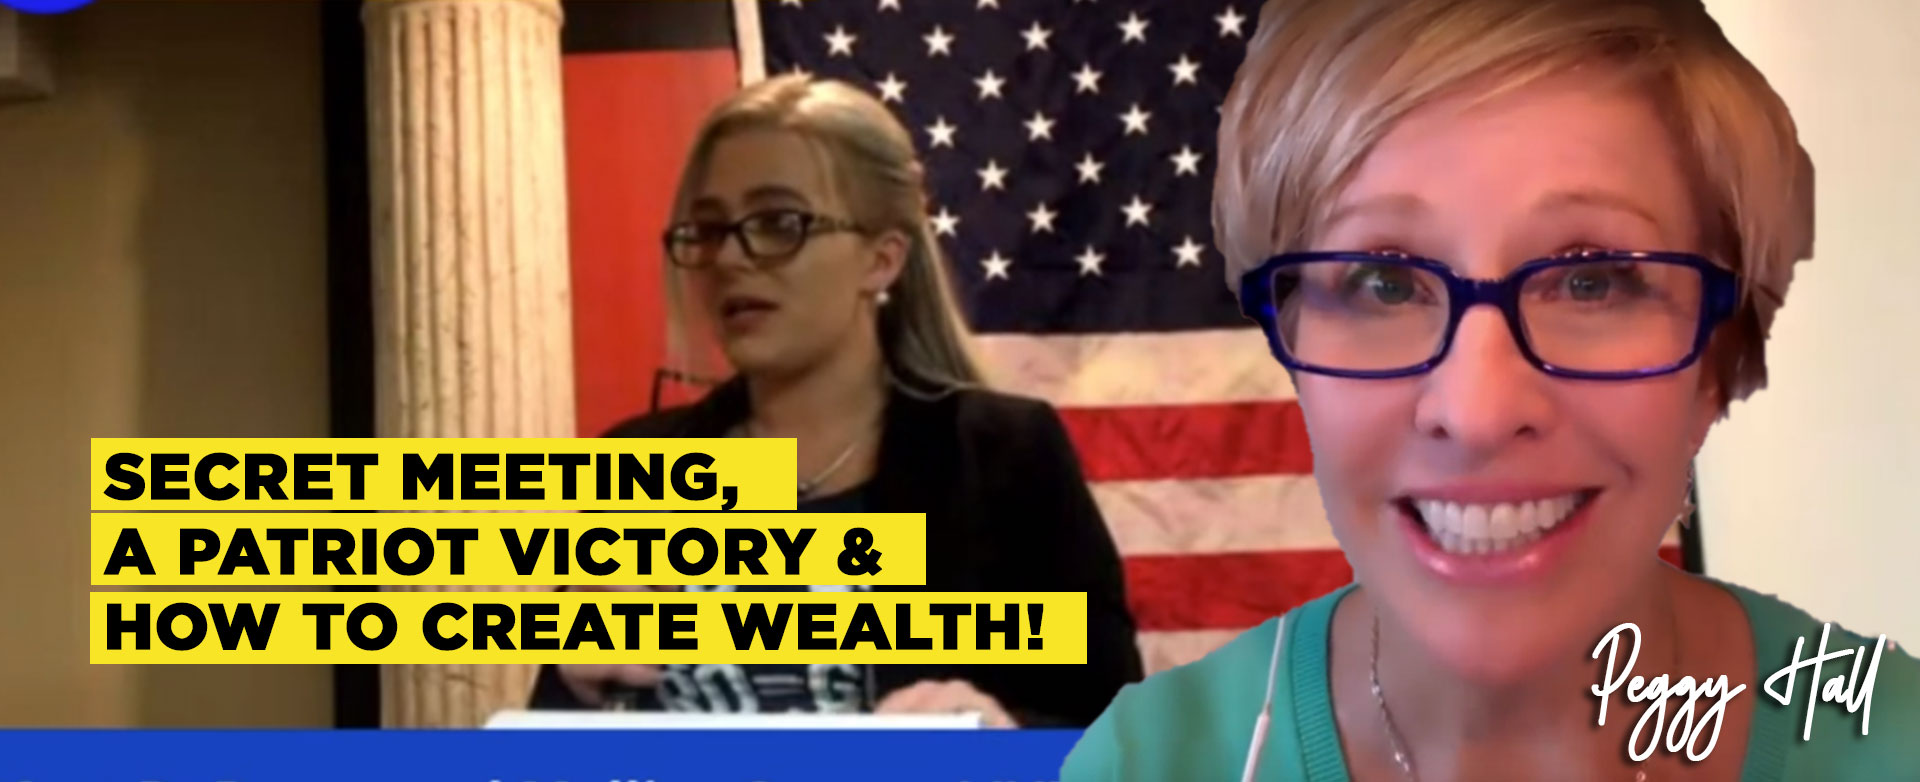 MyPatriotsNetwork-Secret Meeting, A Patriot Victory & How To Create Wealth! March 9, 2021 Update